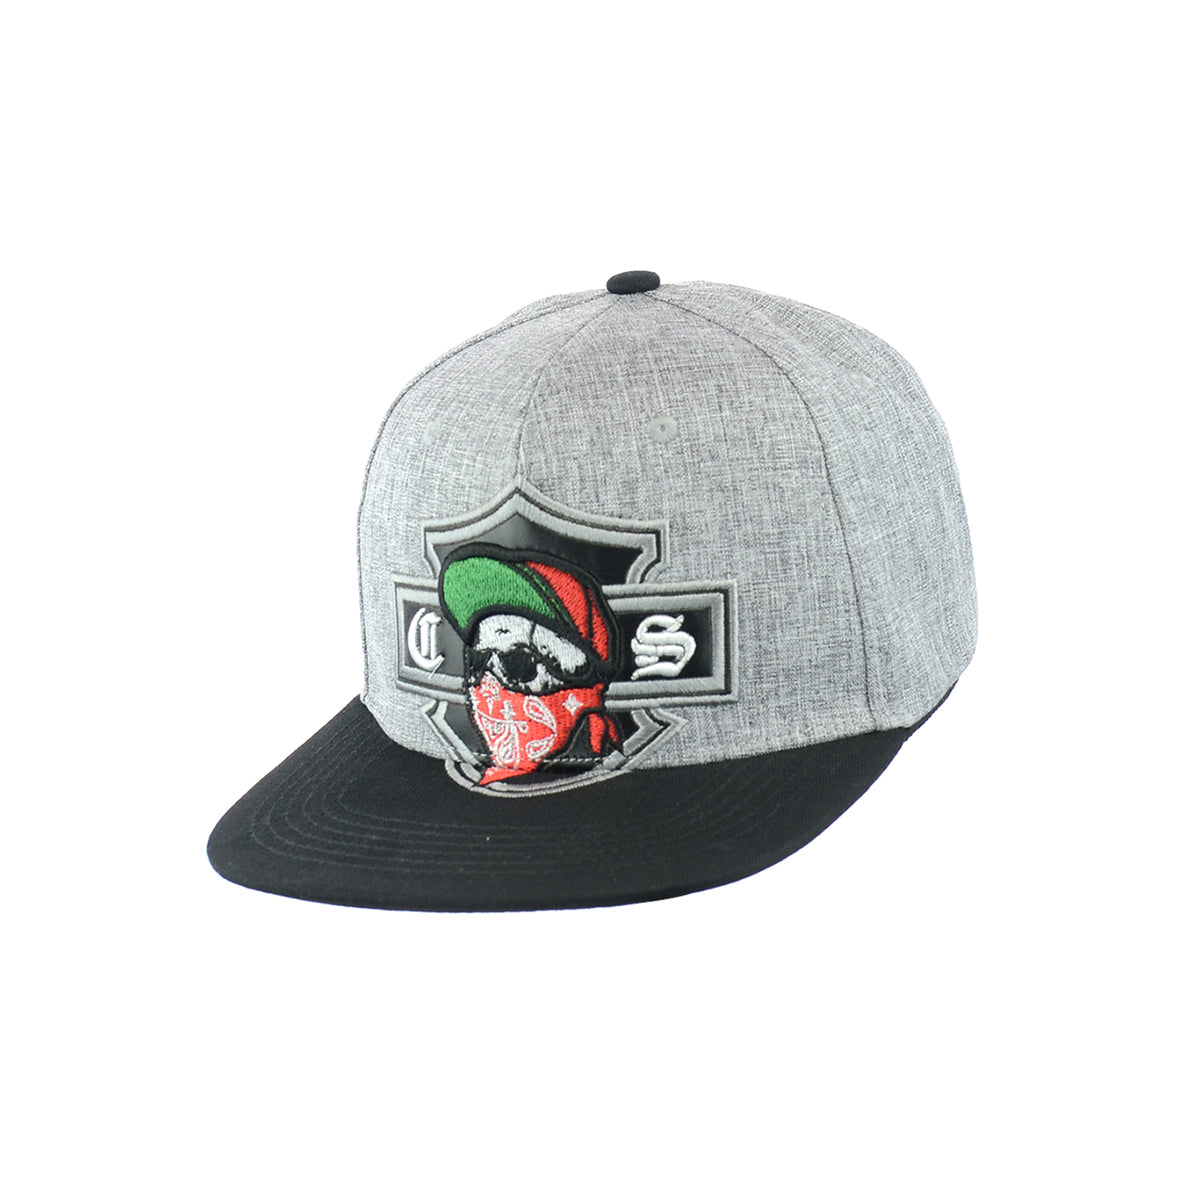 Chicano Style Hat Embroidered Snapback